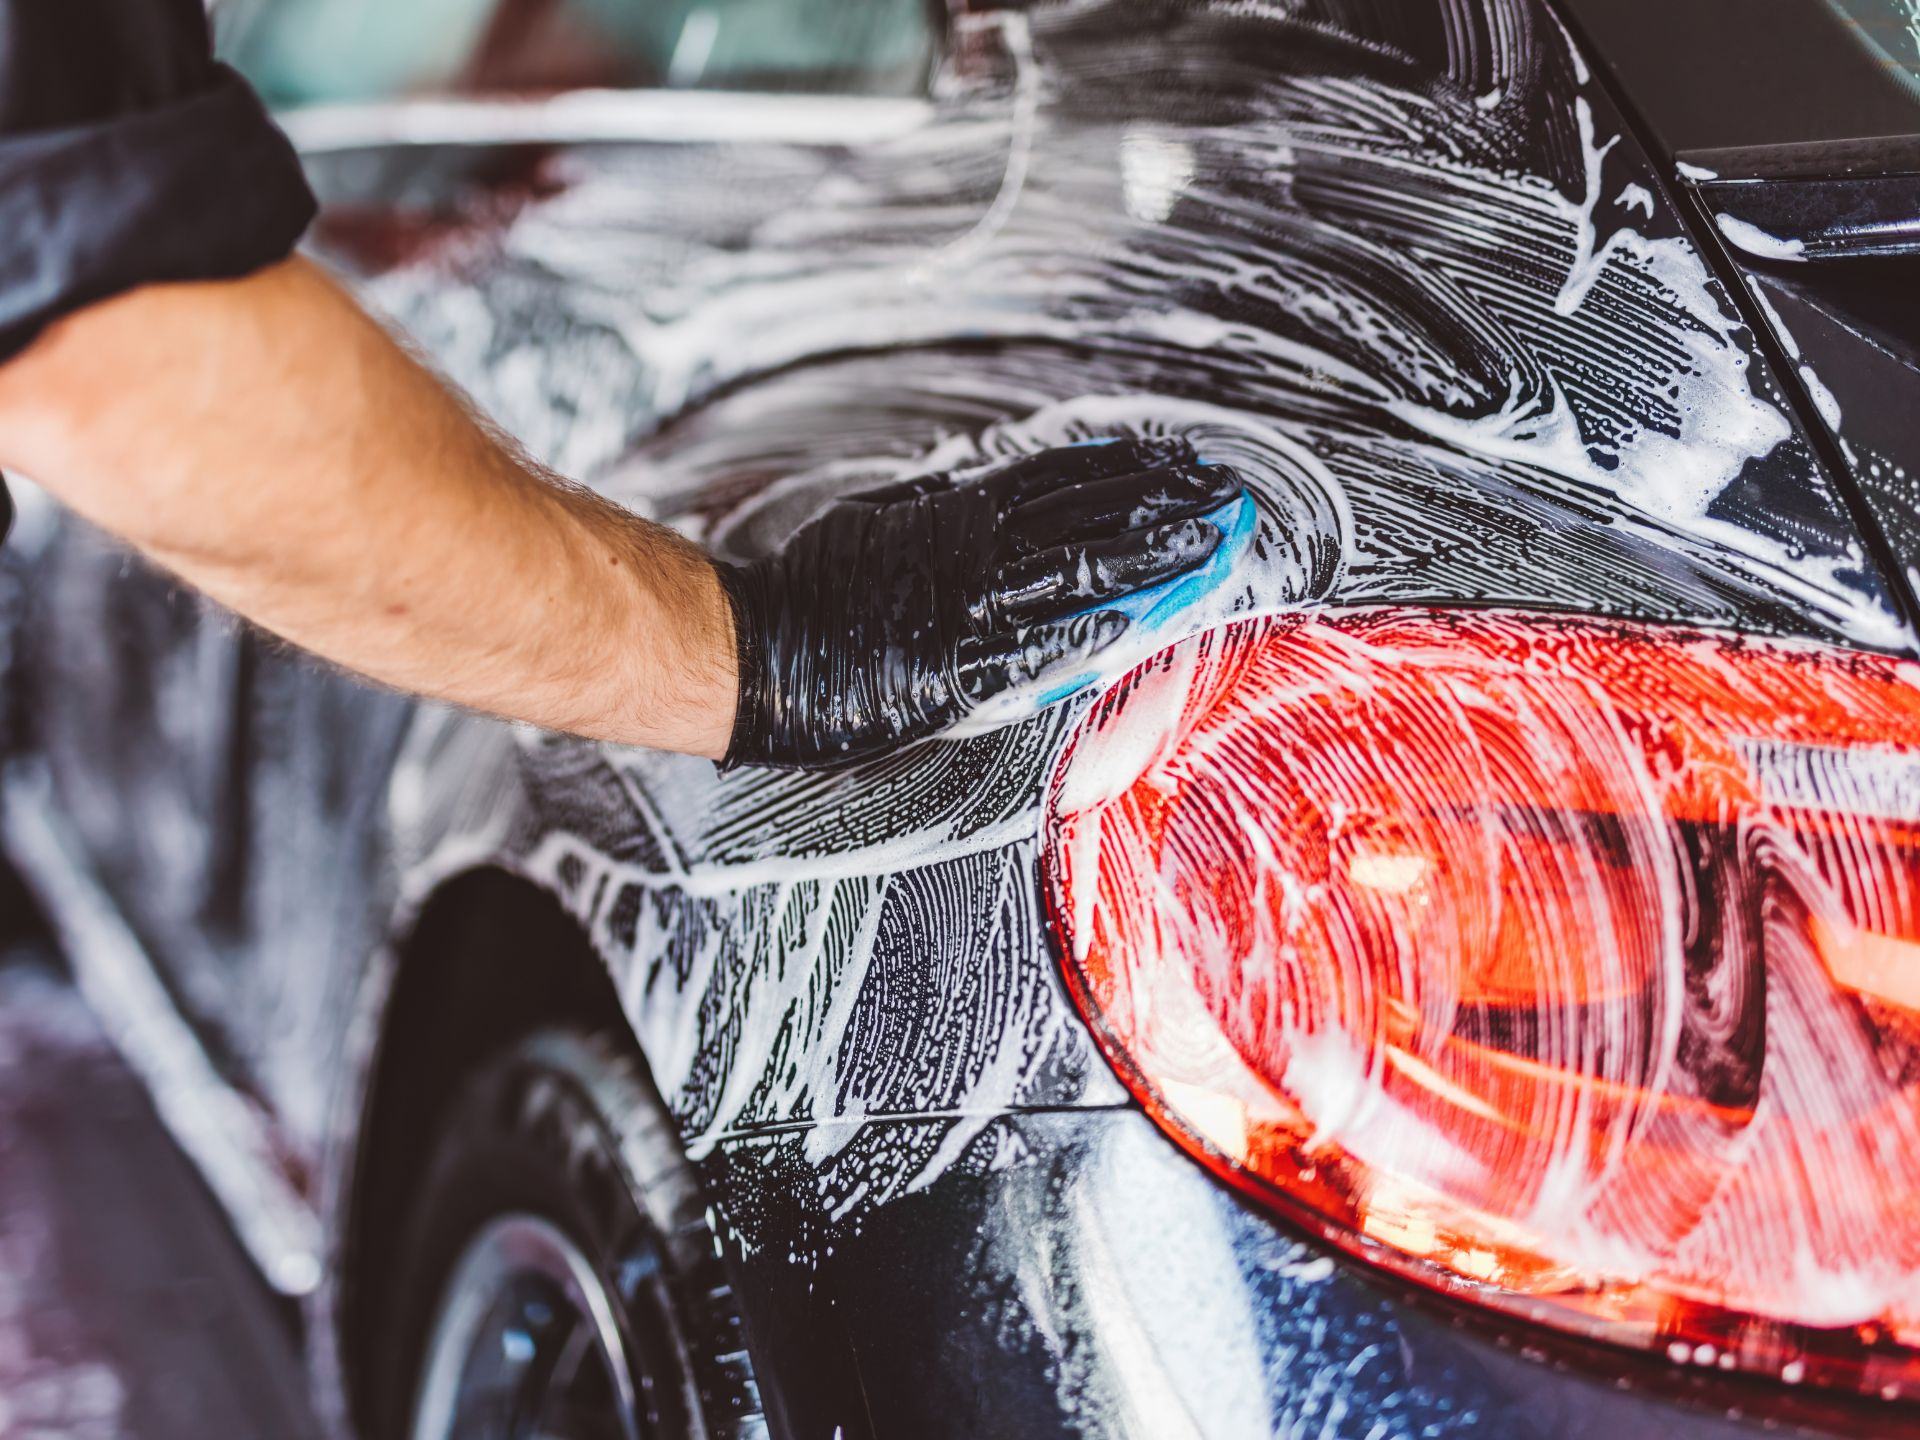 How-to-Wash-A-Ceramic-Coated-Car-by-OCDetailing-Lumberton-NC-1